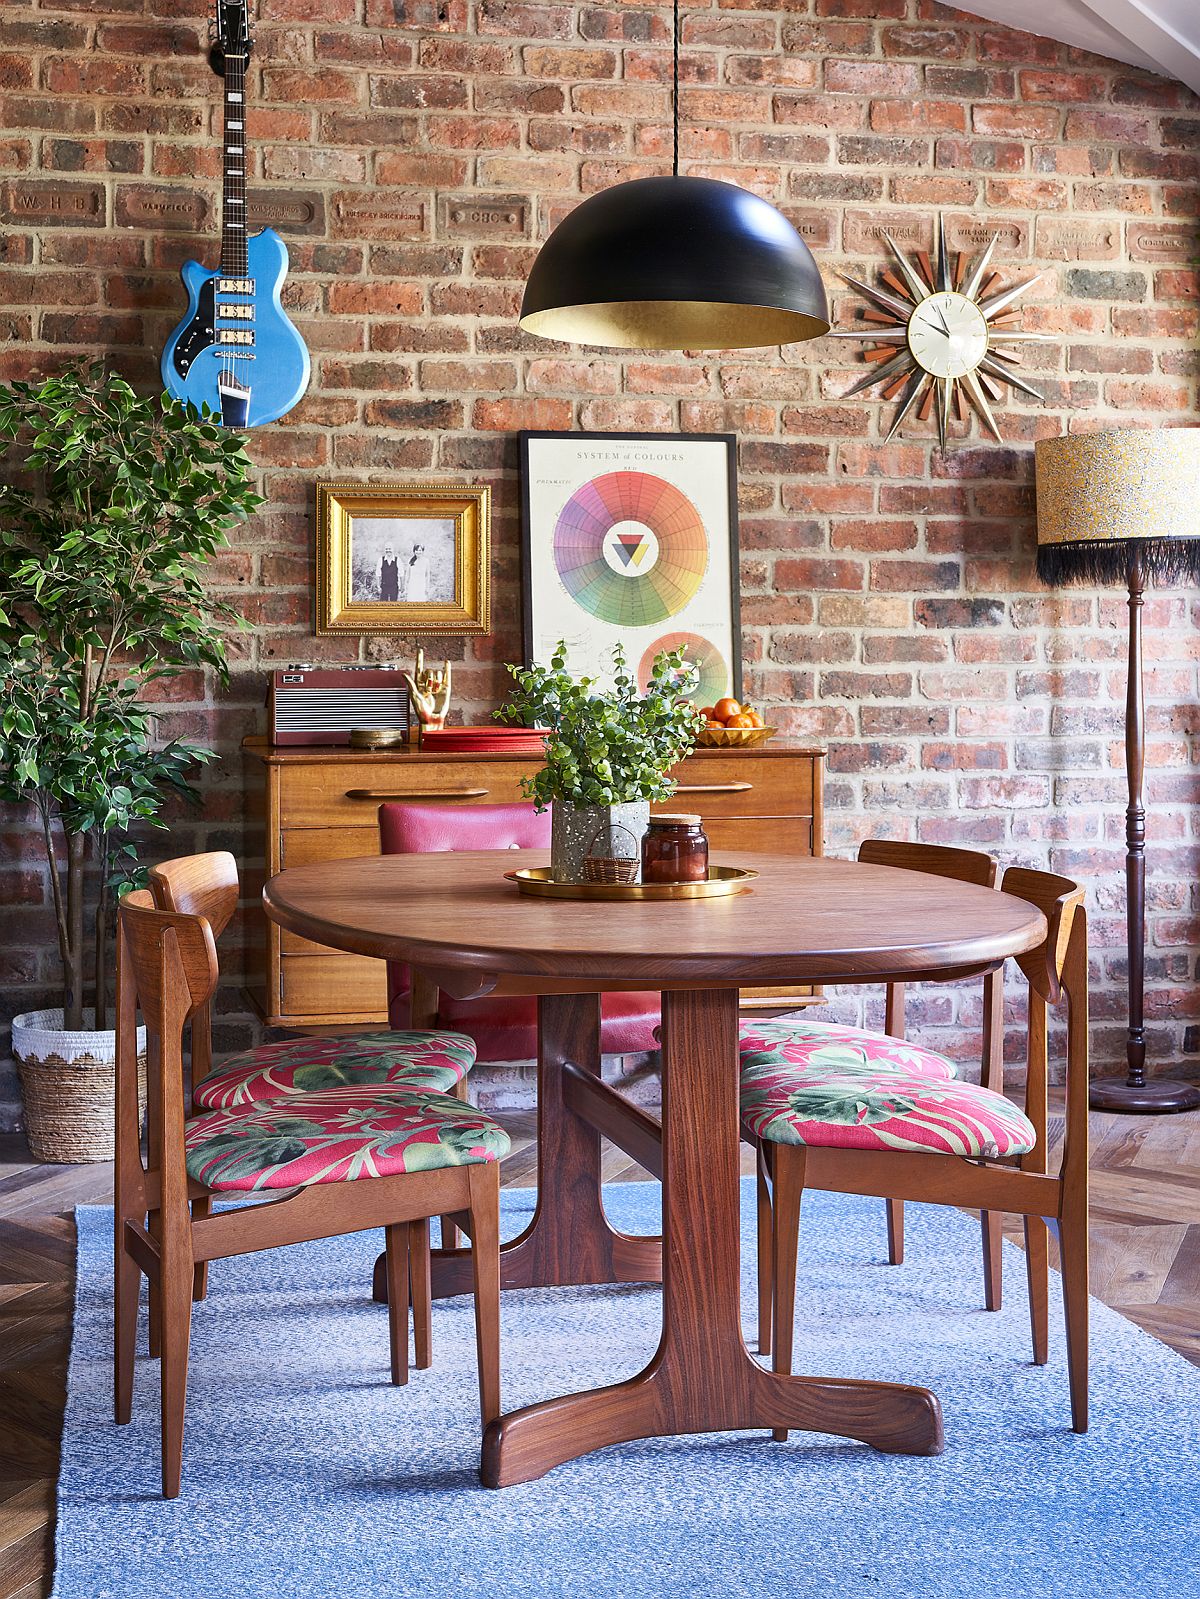 Beautiful brick walls are a hit even in the modern dining room